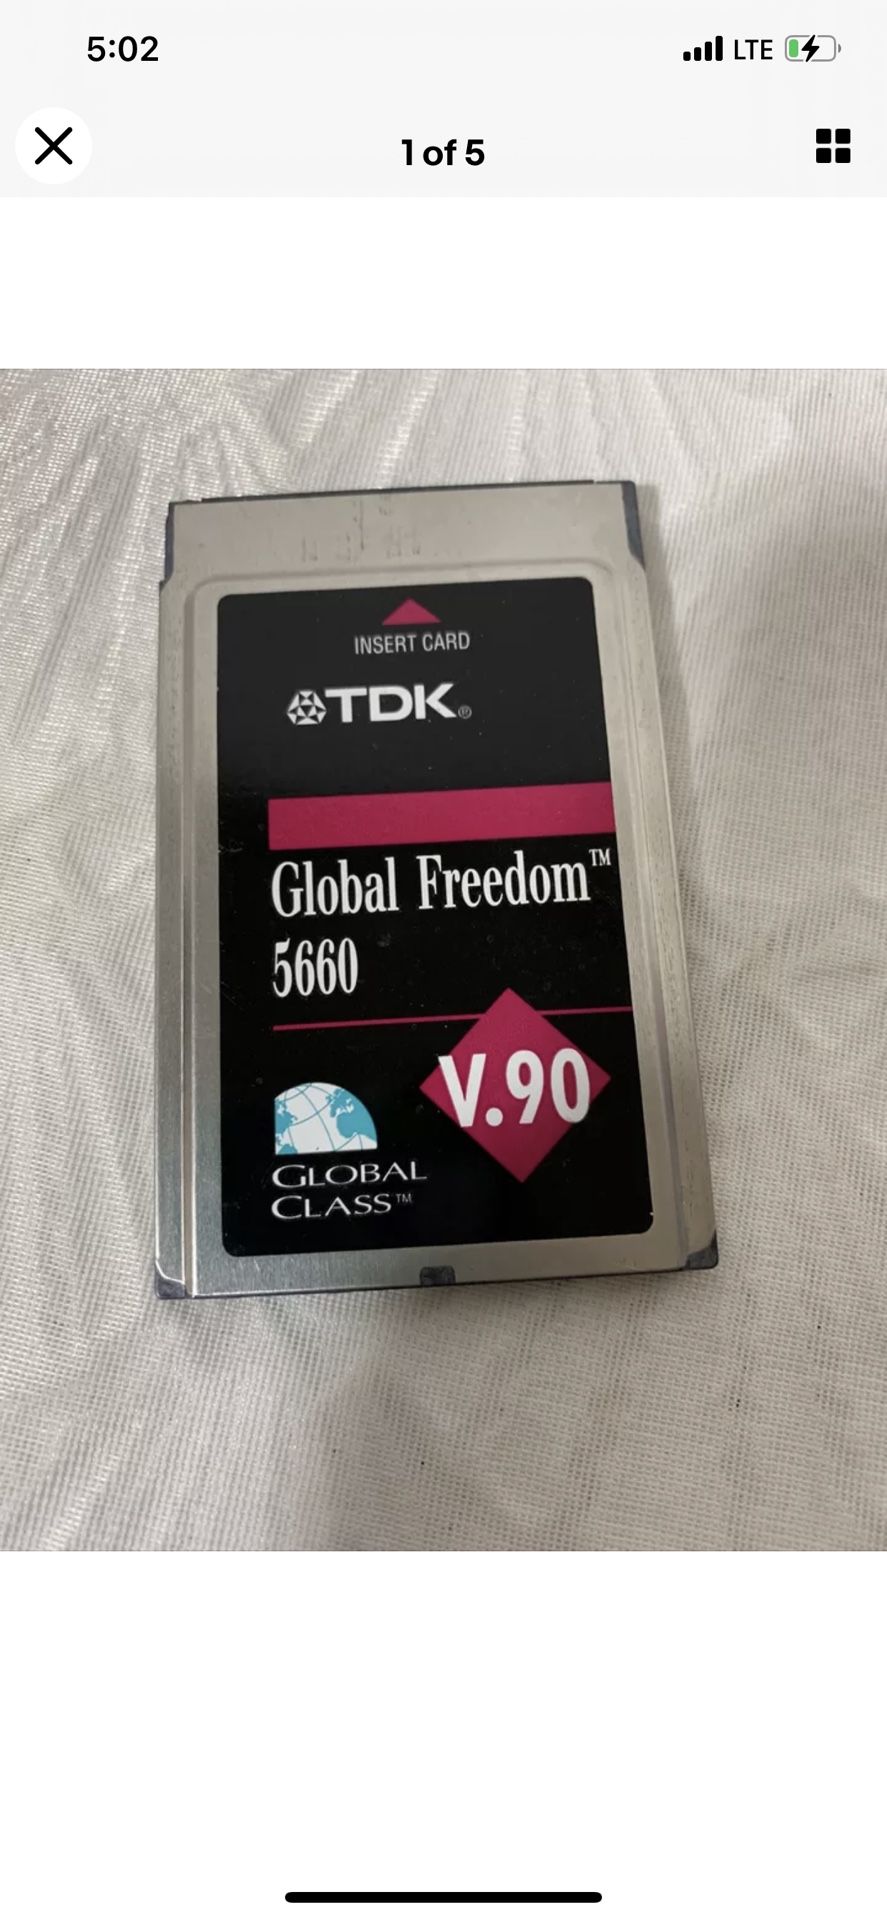 DF5660 - TDK - PCMCIA Global Freedom 5660 V.90 PC Card Modem Computer/Laptop Eqp  In great untested condition! Measurements included in detailed pics!